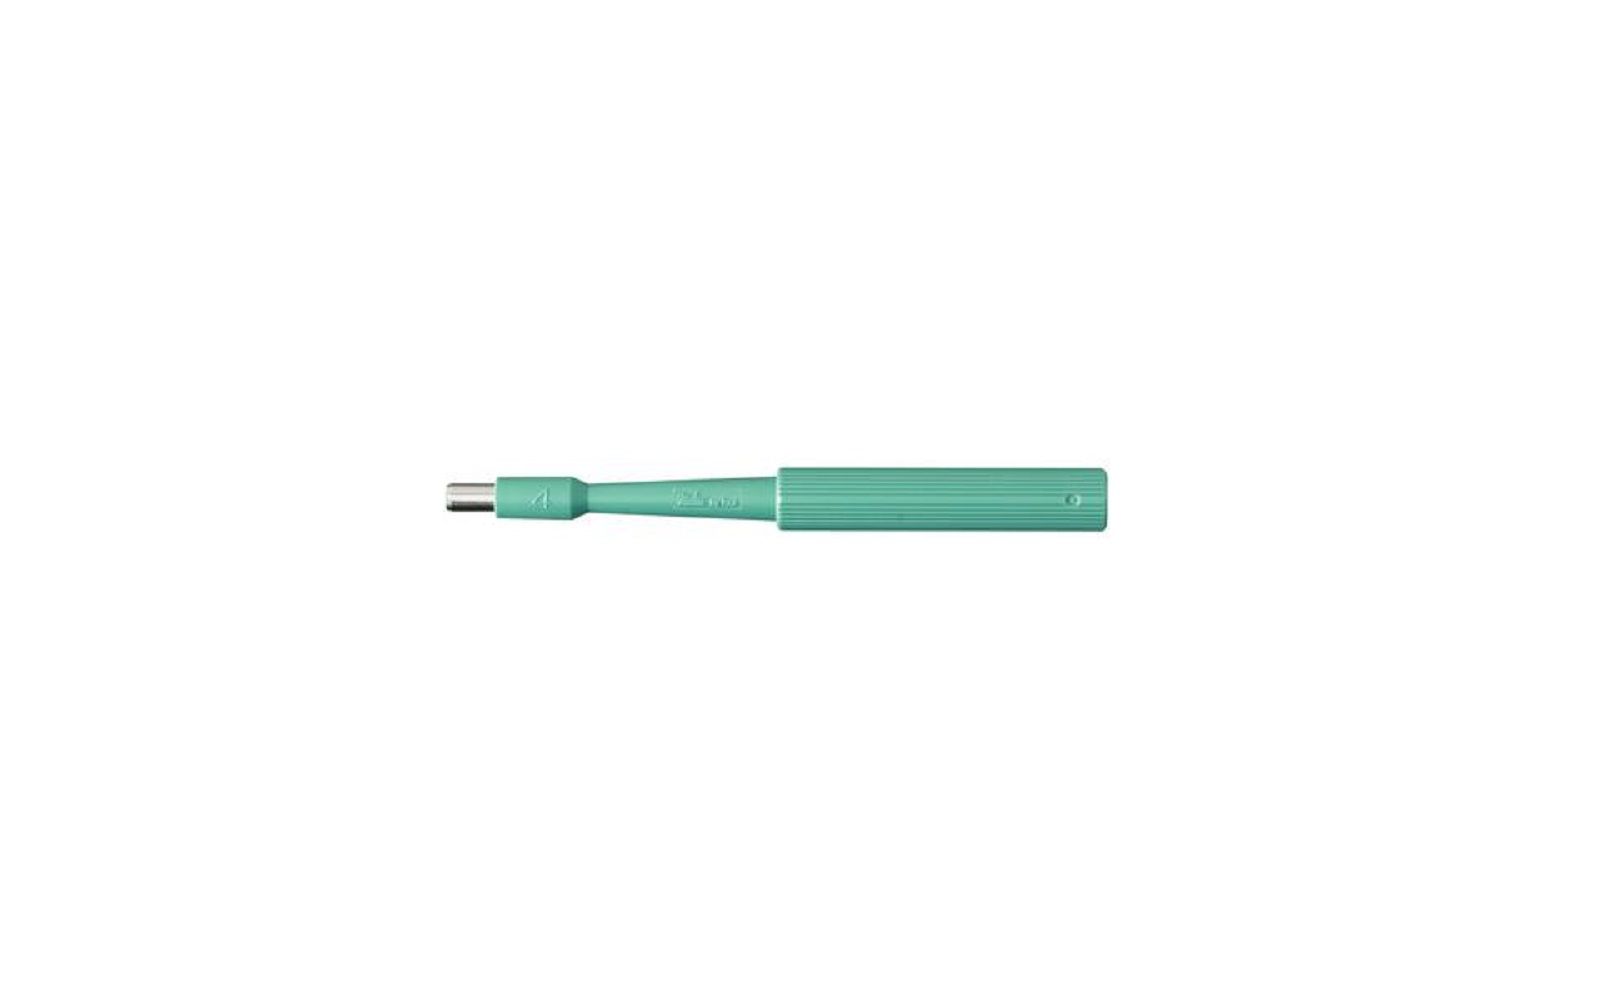 Standard biopsy punches, 50/pkg - miltex by integra